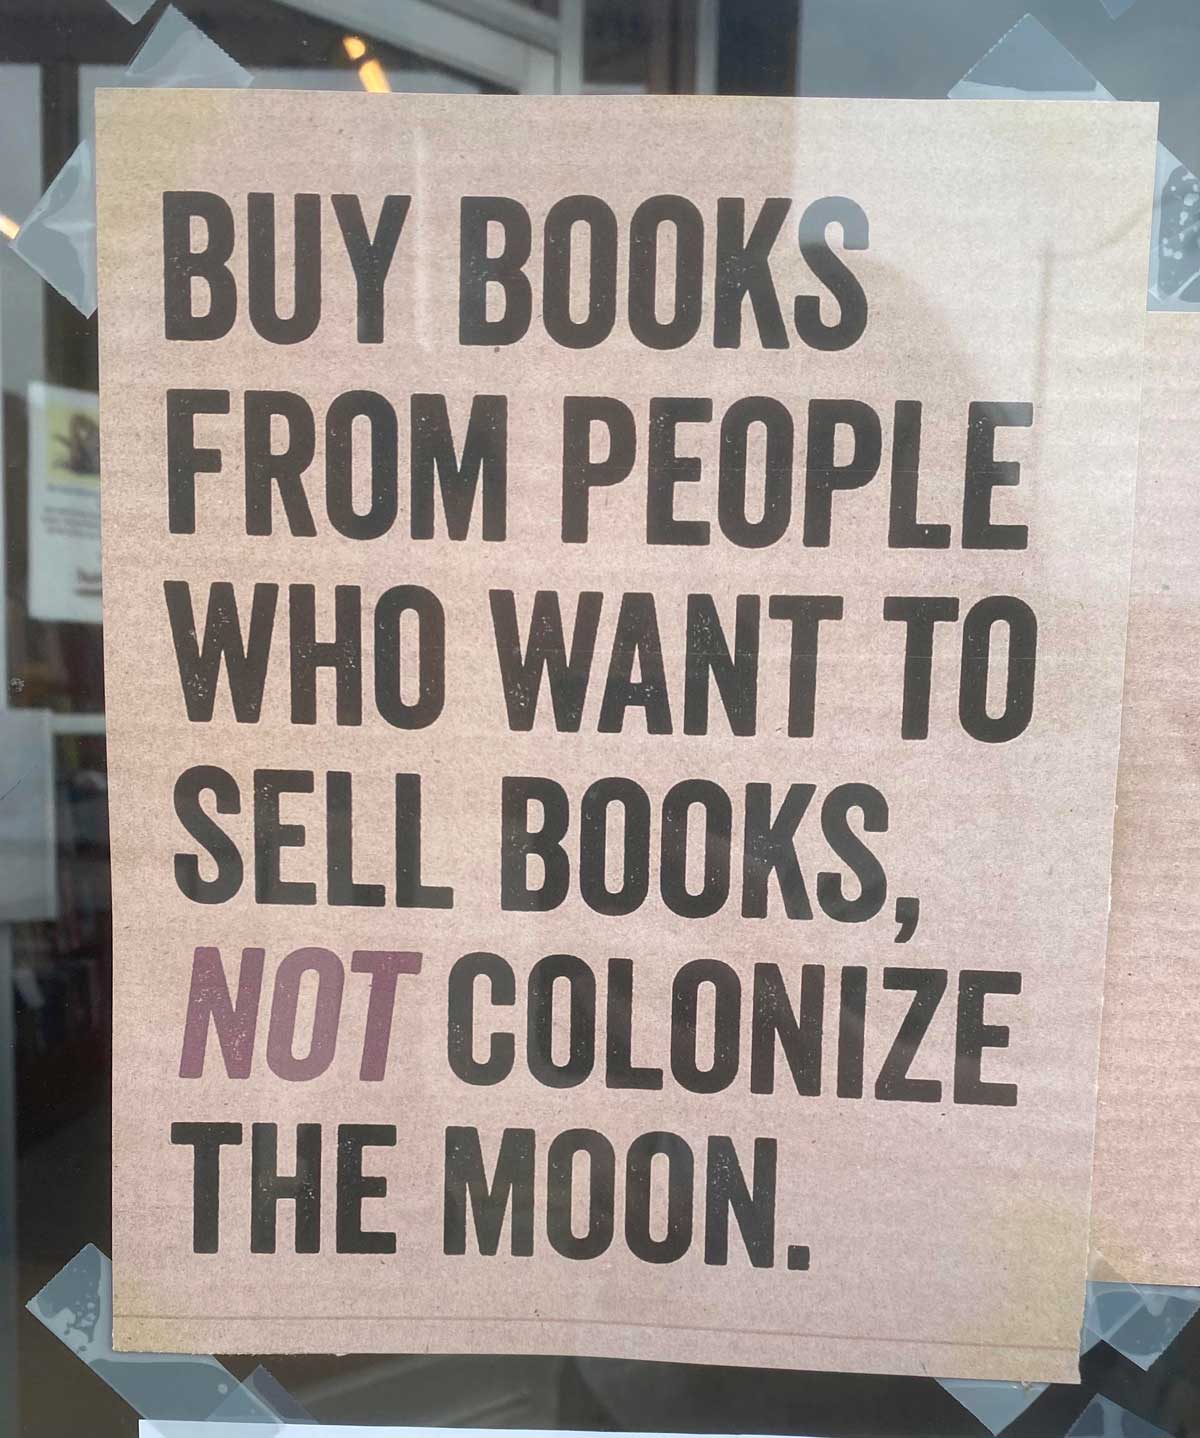 In the window of an indie bookstore